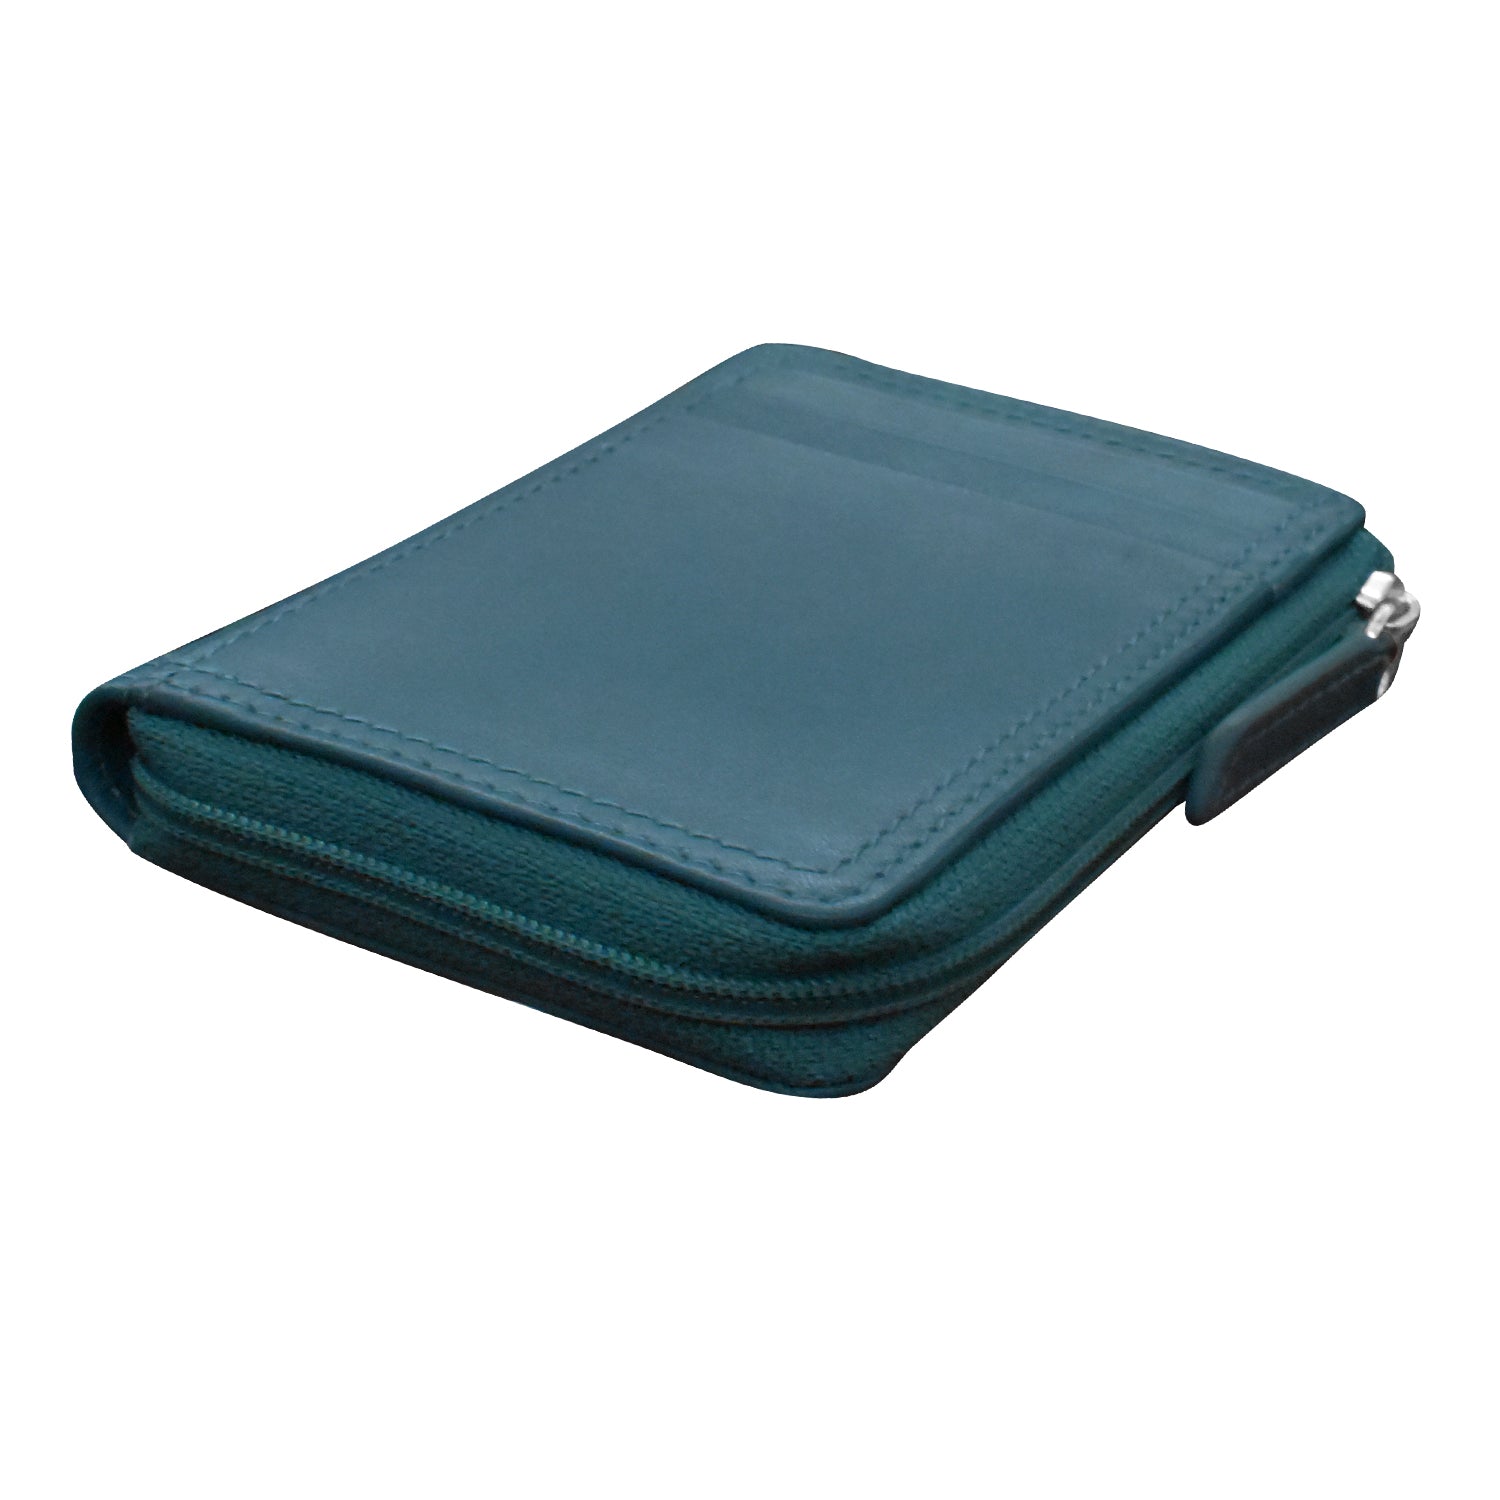 Double Sided Credit Card Holder - Browse Online – ili New York